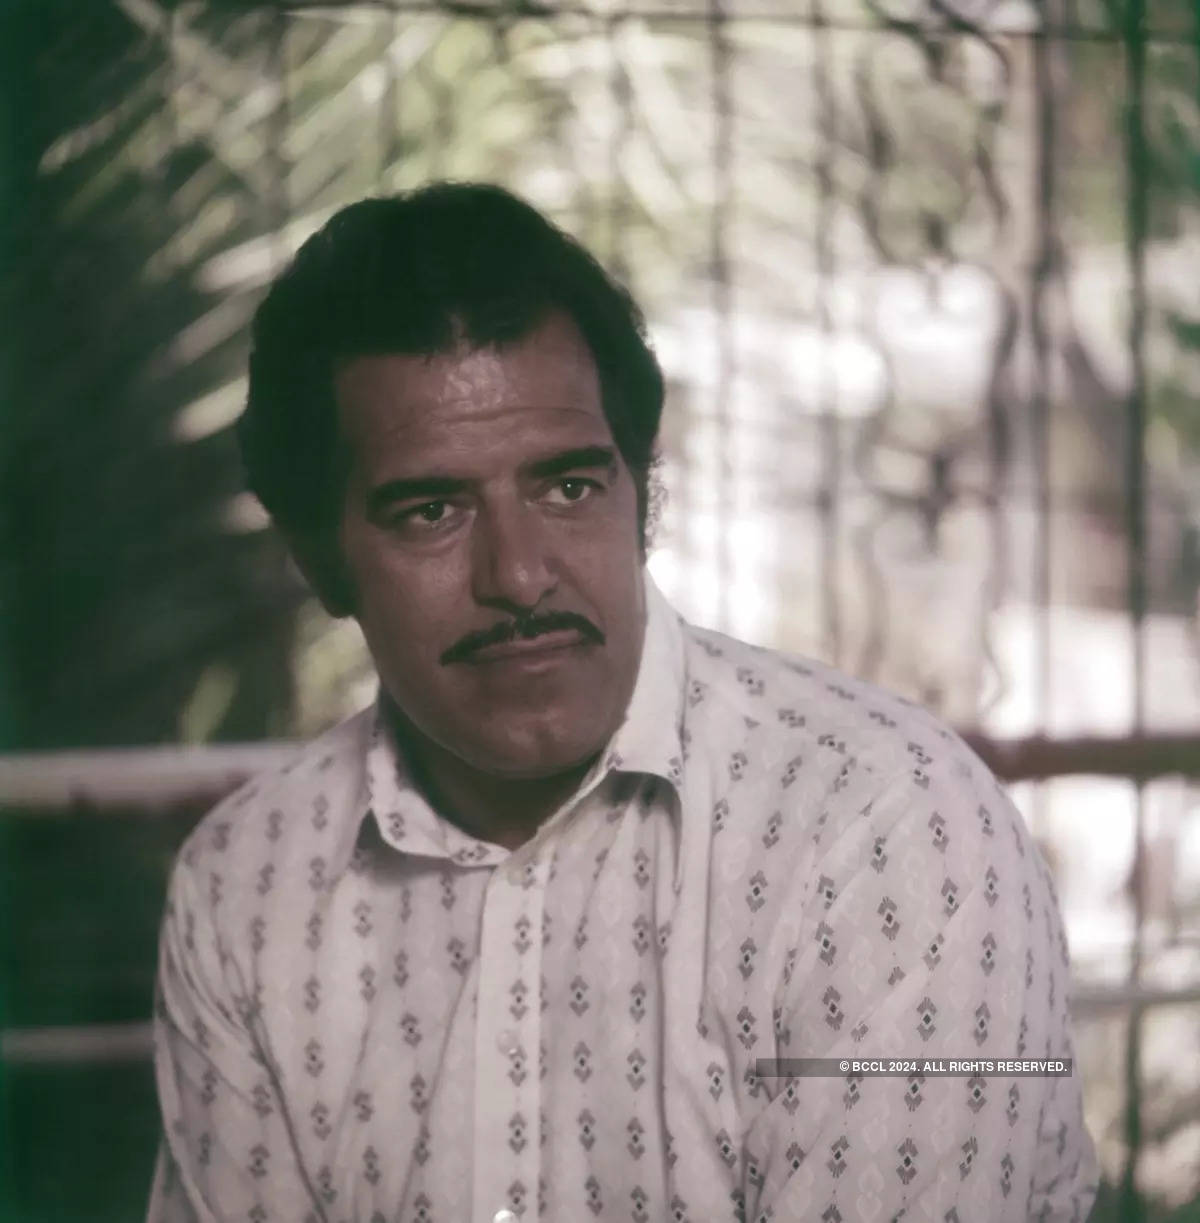 #GoldenFrames: Dara Singh, the famous Indian wrestler, who became a silver screen star